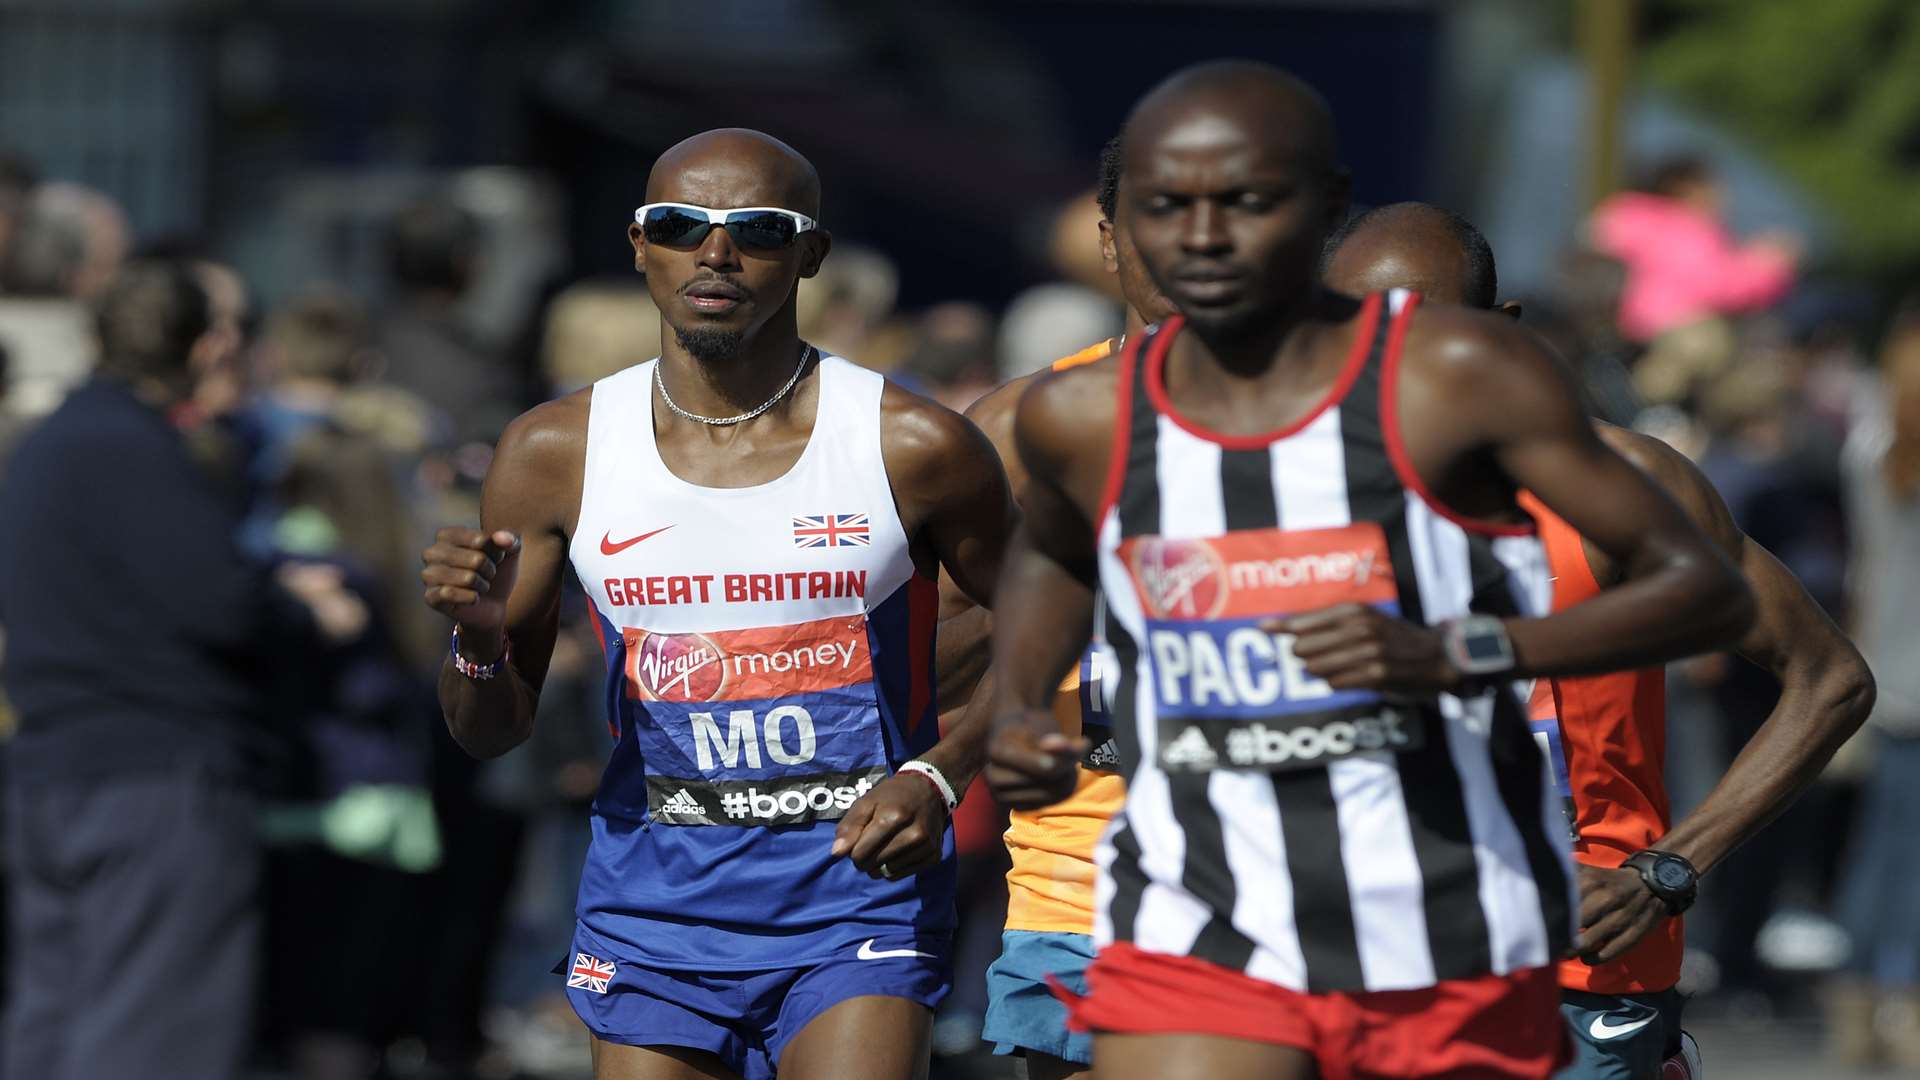 World and Olympic champion Mo Farah enjoyed success representing Britain after relocating from Somalia. Picture: Barry Goodwin.